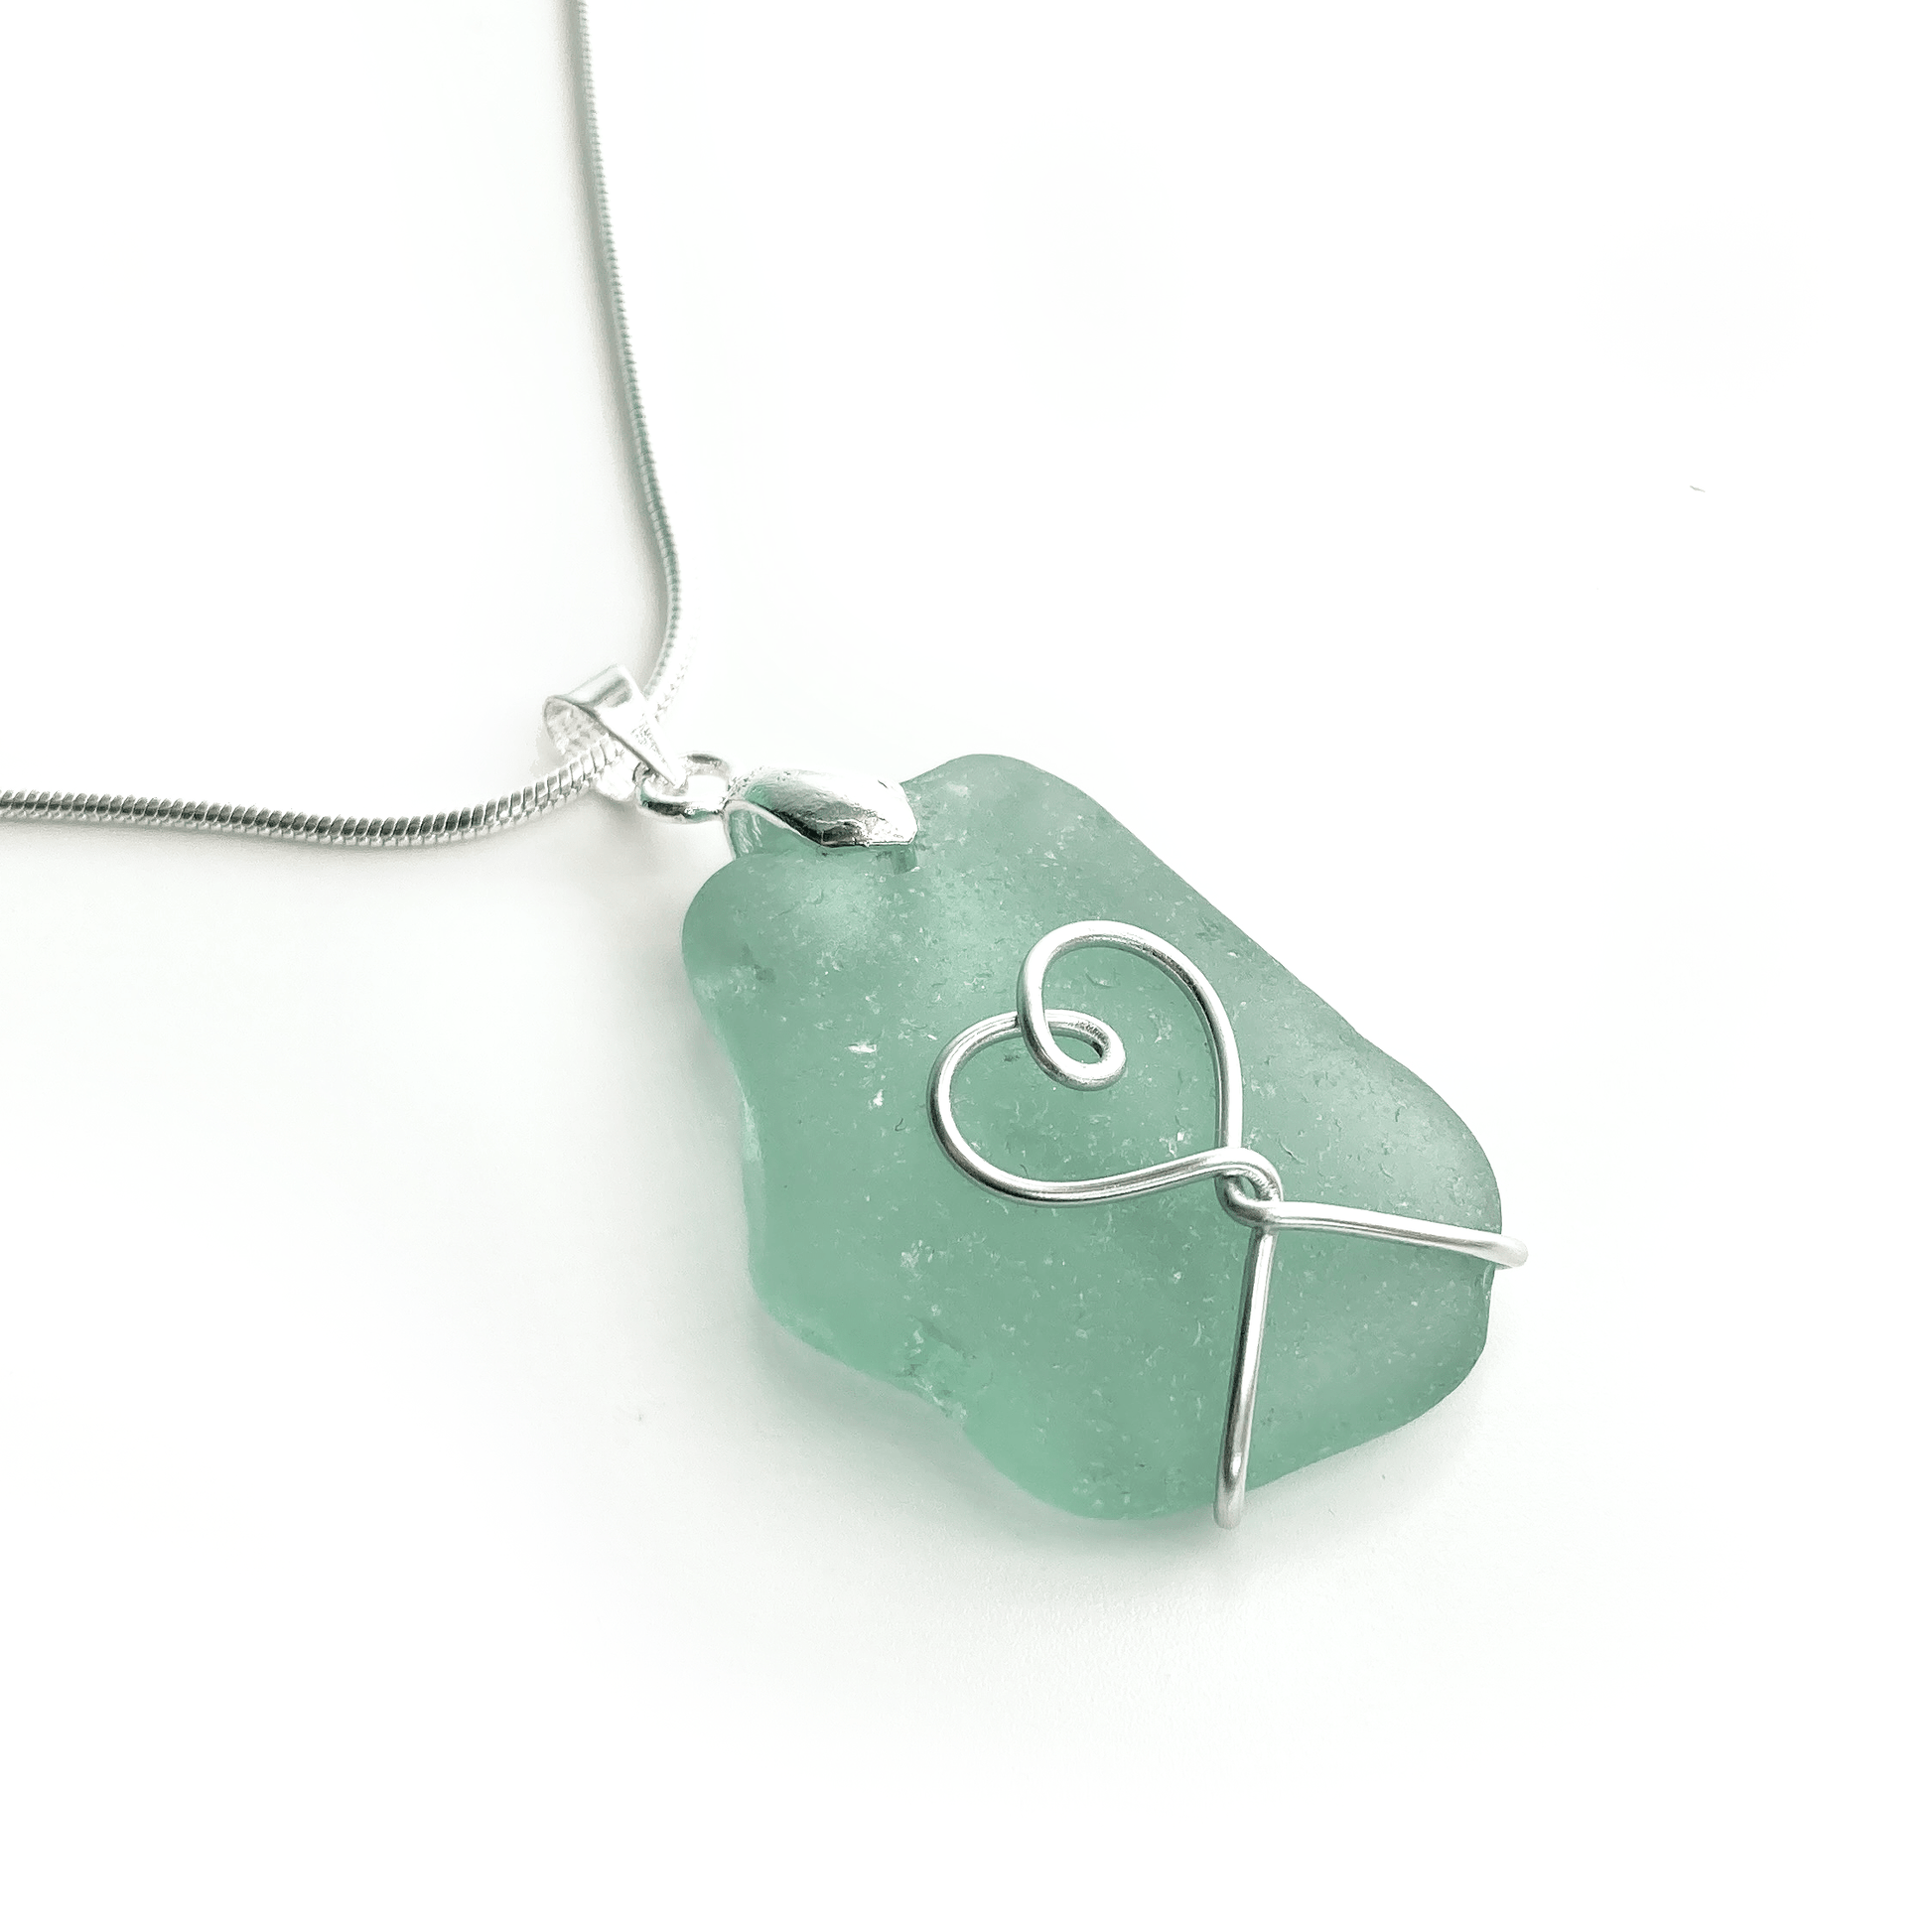 Sea Glass Pendant - Aqua Green Heart Wire Wrapped Necklace - Scottish Silver Jewellery - East Neuk Beach Crafts